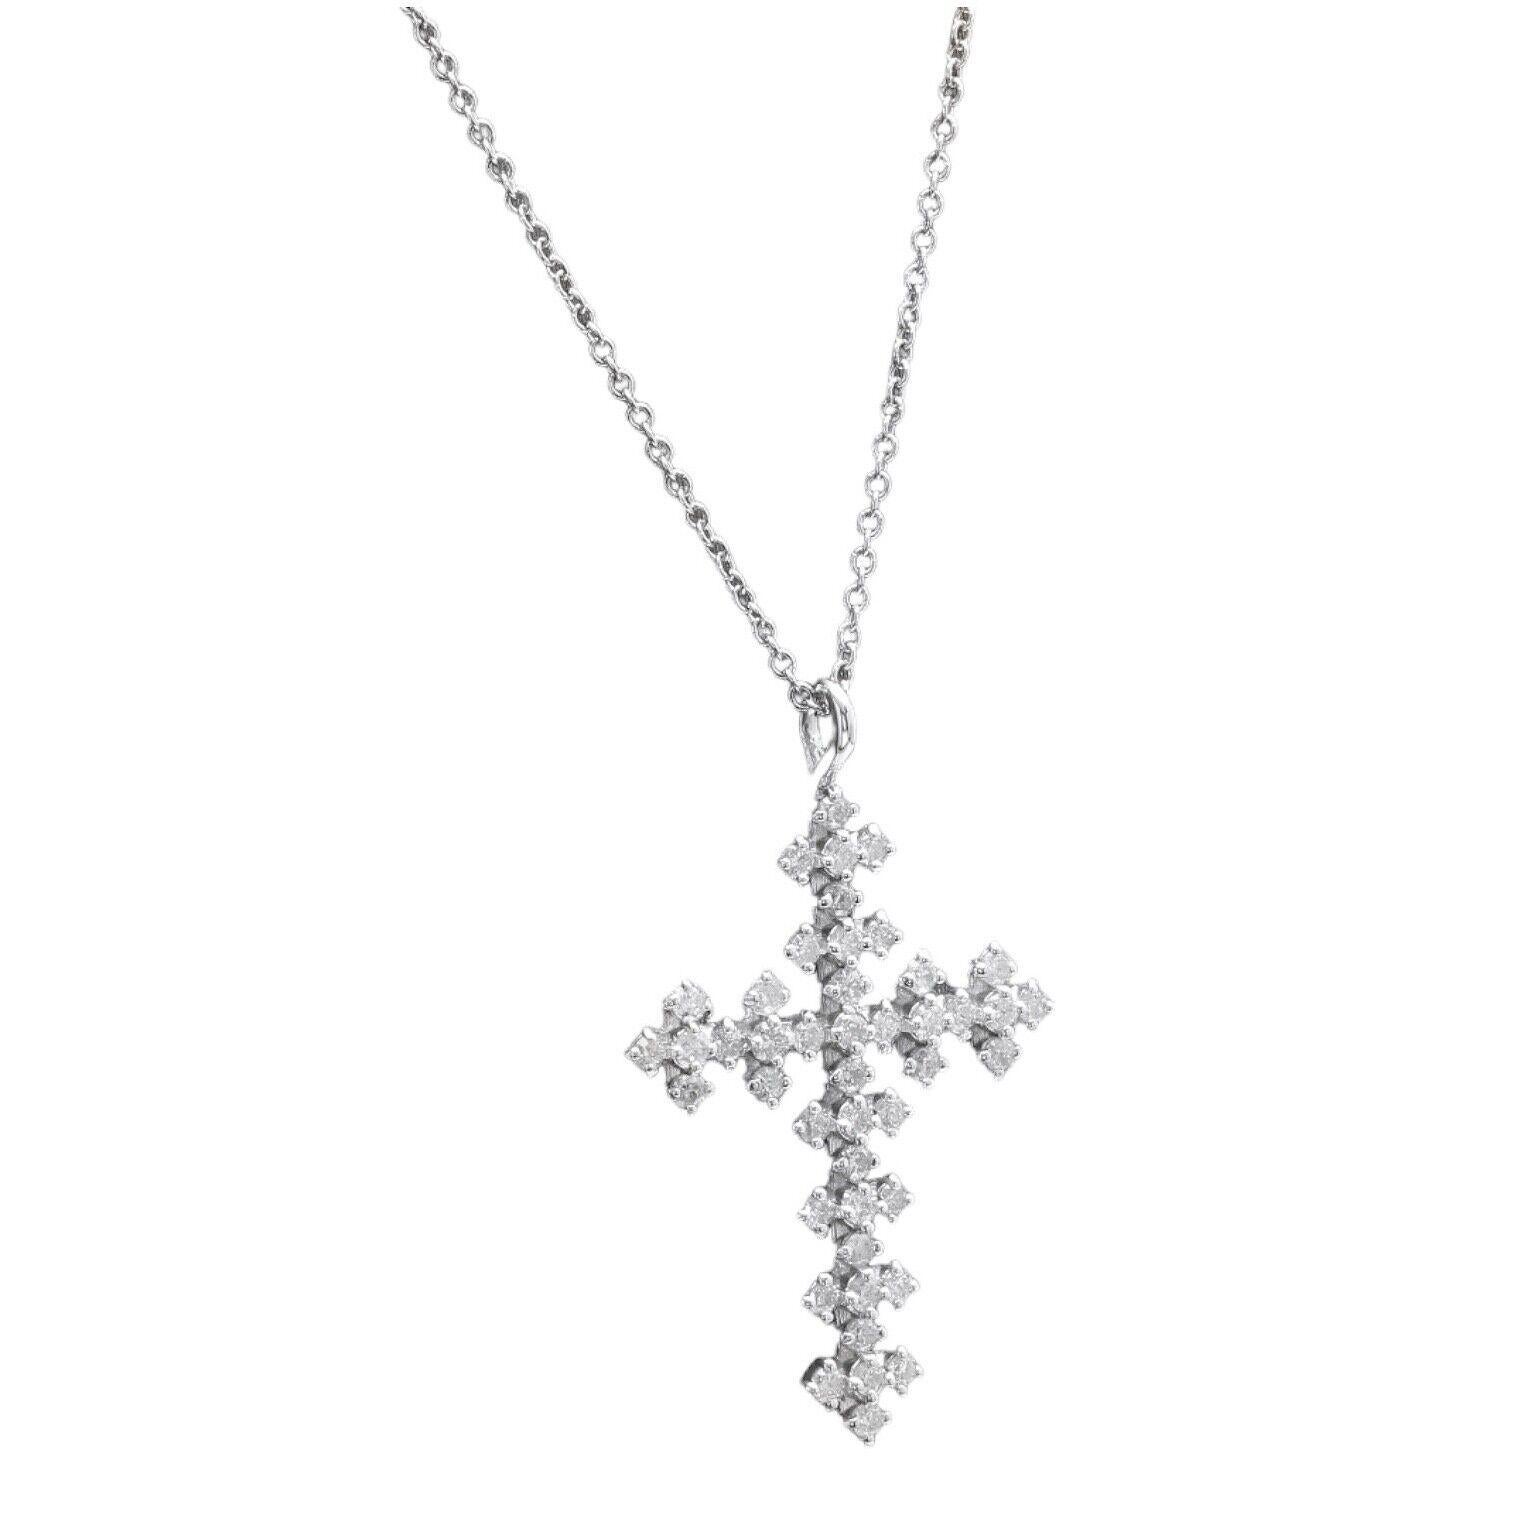 0.65Ct Natural Diamond Cross Necklace in 14K Solid White Gold

Amazing looking piece! 

Stamped: 14k

Total Natural Diamond Weight is: Approx. 0.65 Carats ( G-H / SI)

Pendant Measures: 30.80 x 19.50mm

Chain Length is: 18 inches

Total item weight